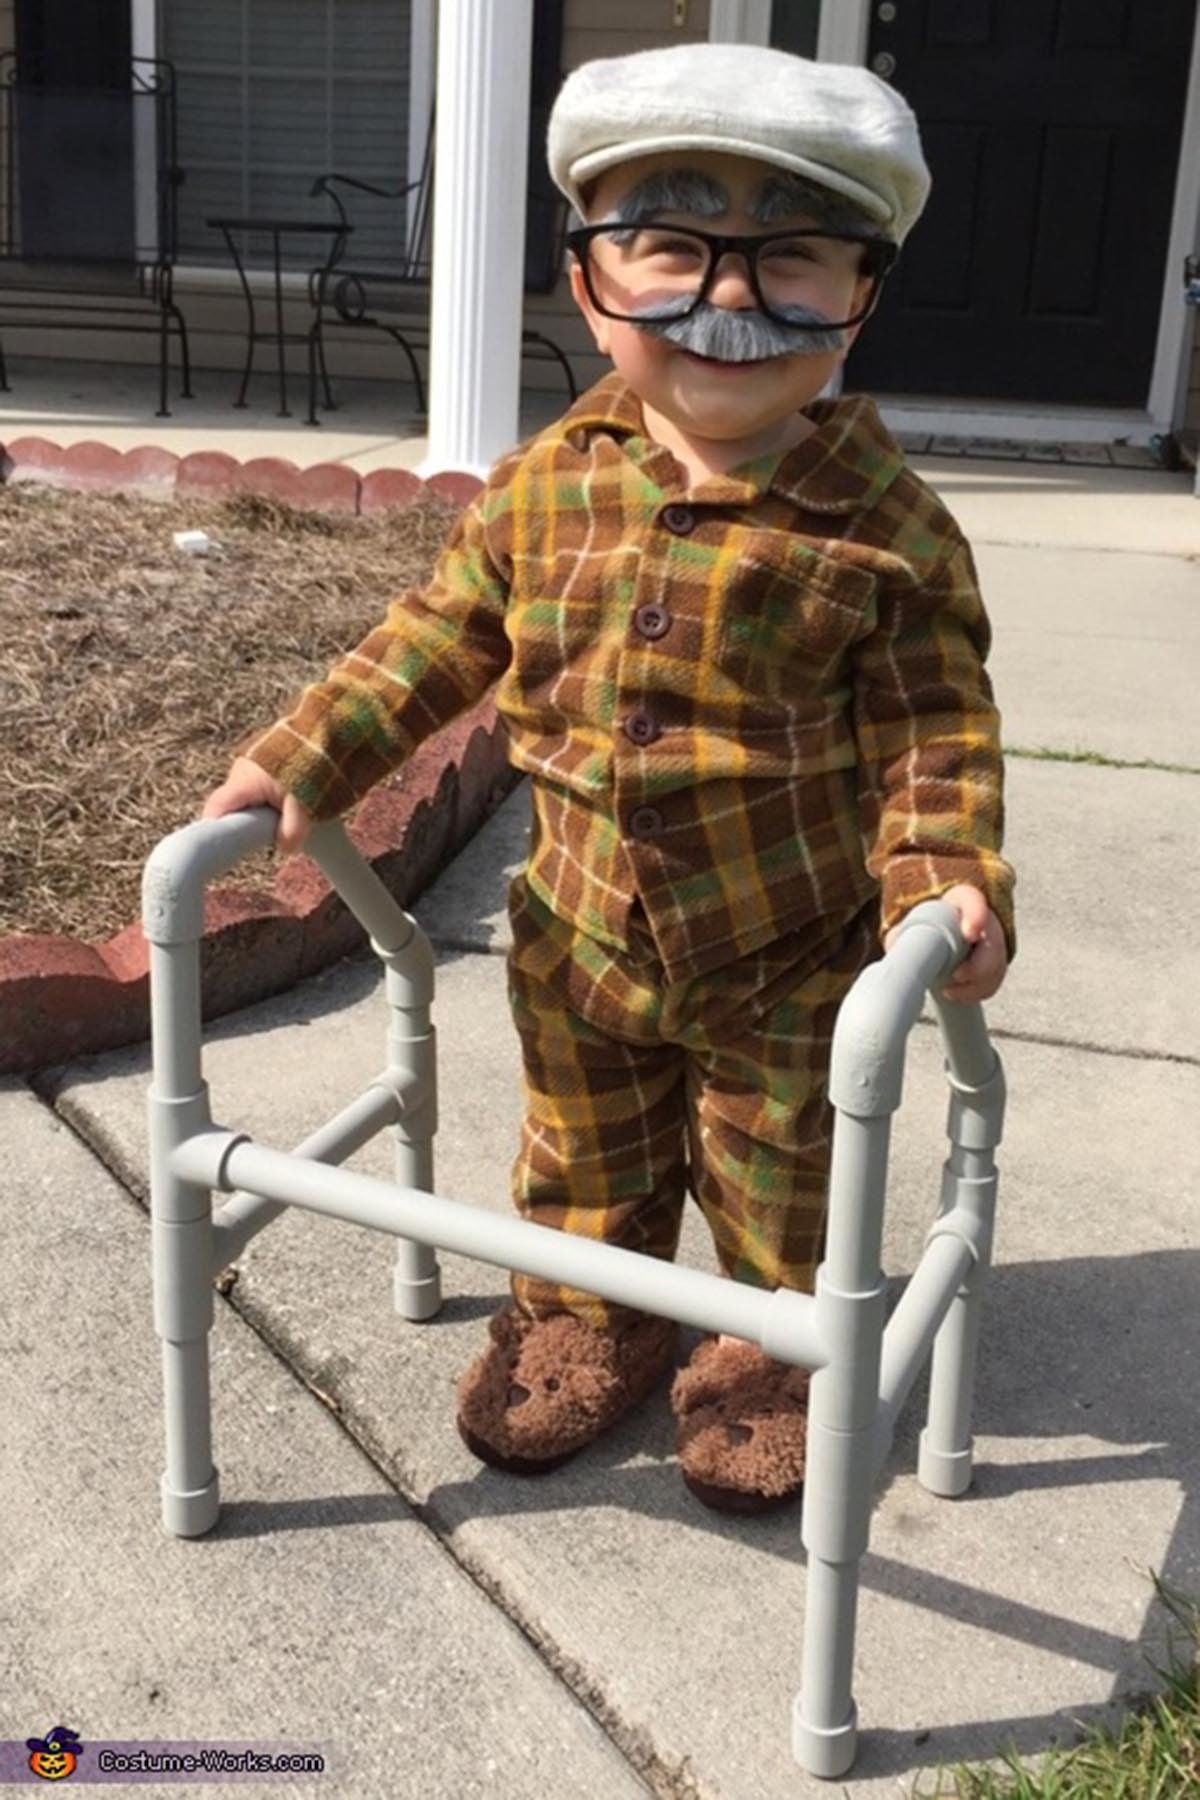 Just 20 Photos Of Kids Dressed As Old People 'Cause It's Ridiculously Cute